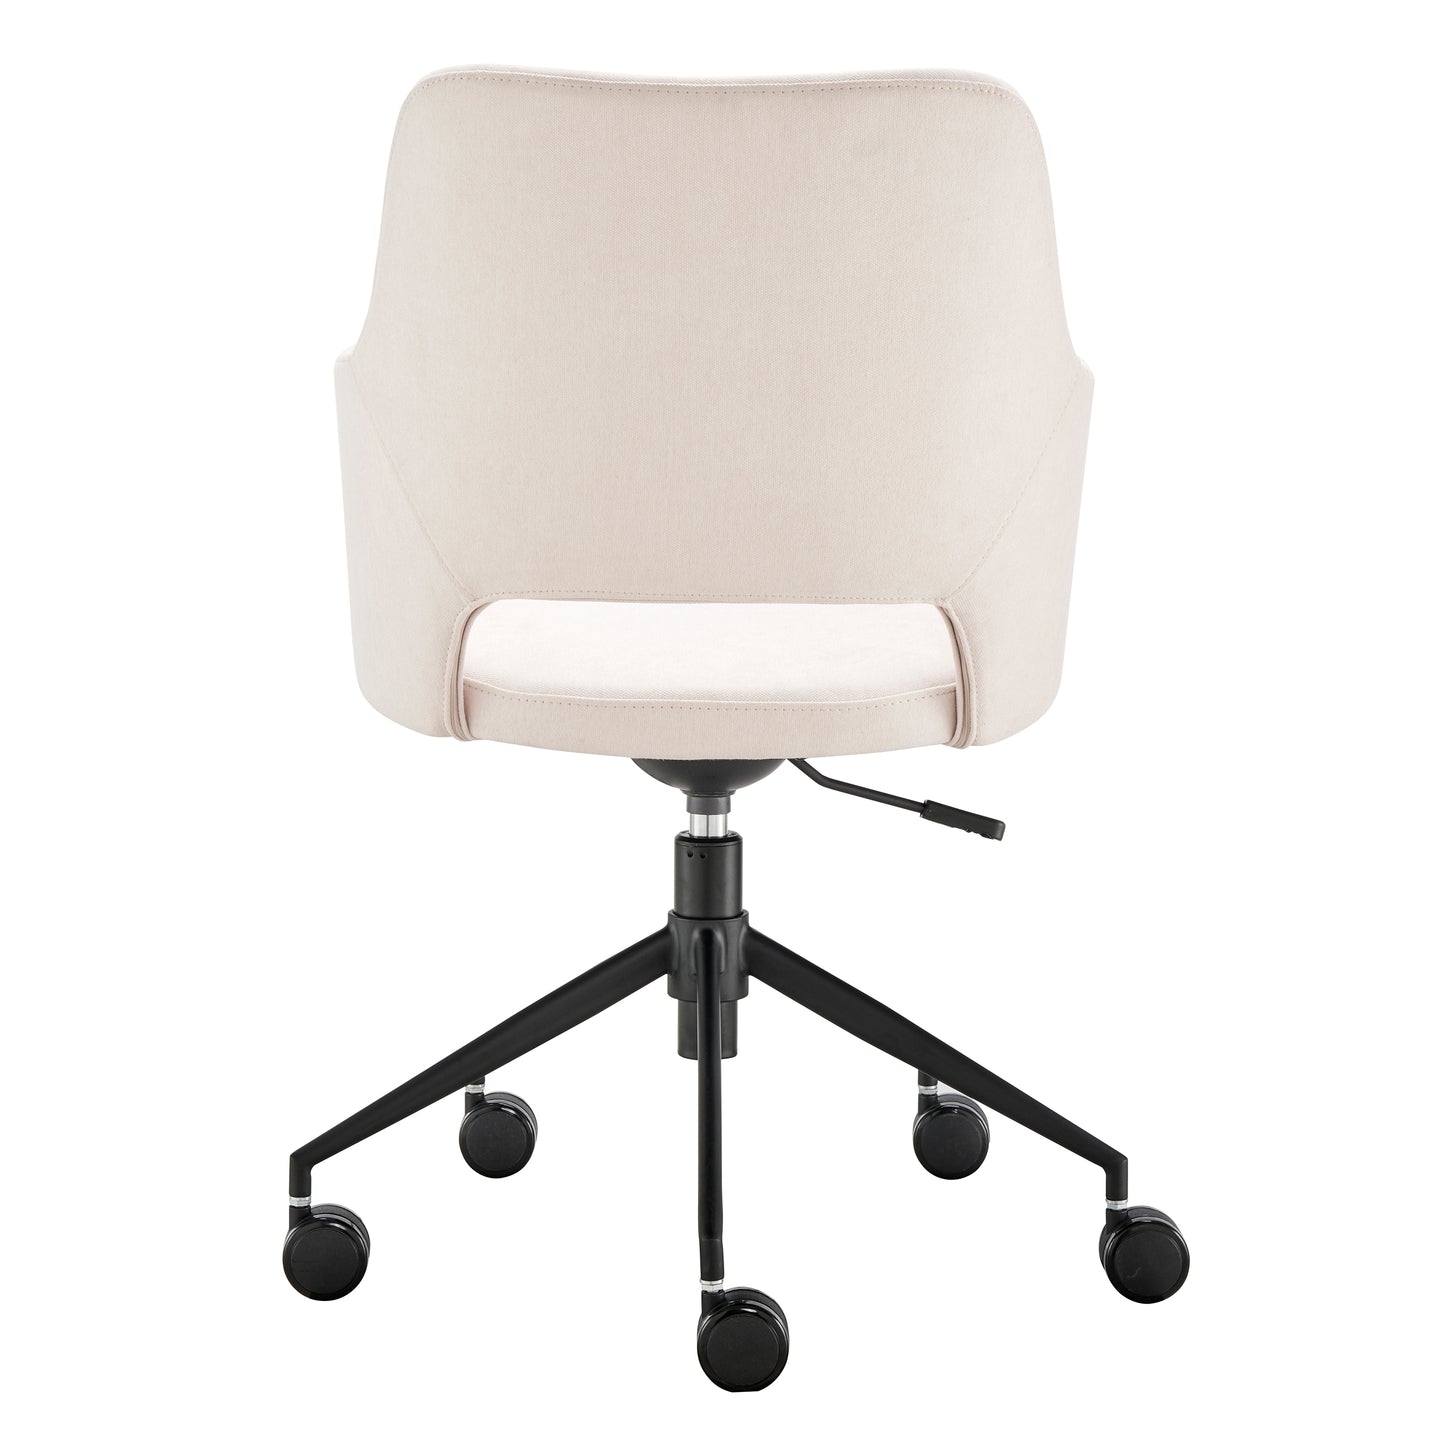 Load image into Gallery viewer, Darcie Office Chair Office Chairs Eurostyle     Four Hands, Mid Century Modern Furniture, Old Bones Furniture Company, Old Bones Co, Modern Mid Century, Designer Furniture, https://www.oldbonesco.com/
